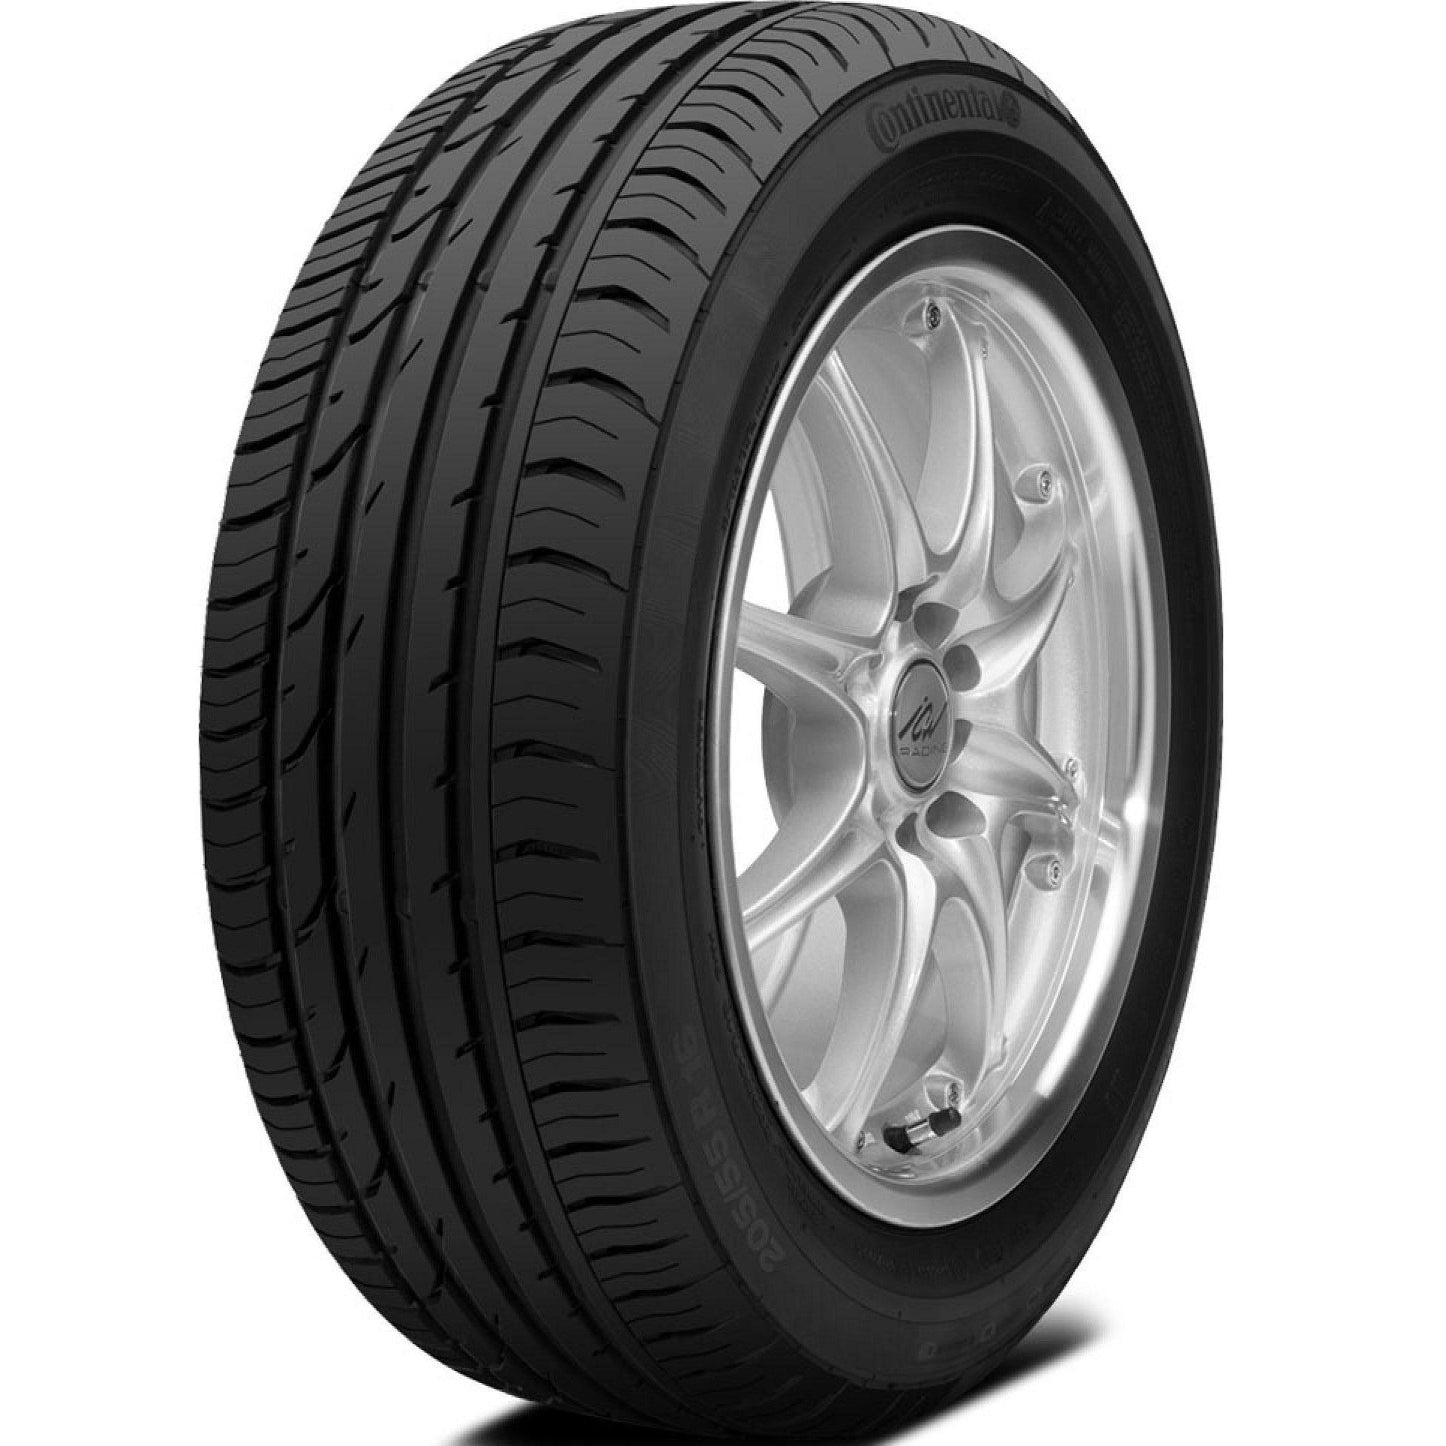 CONTINENTAL CONTIPREMIUMCONTACT 2 175/65R15 (24X6.9R 15) Tires